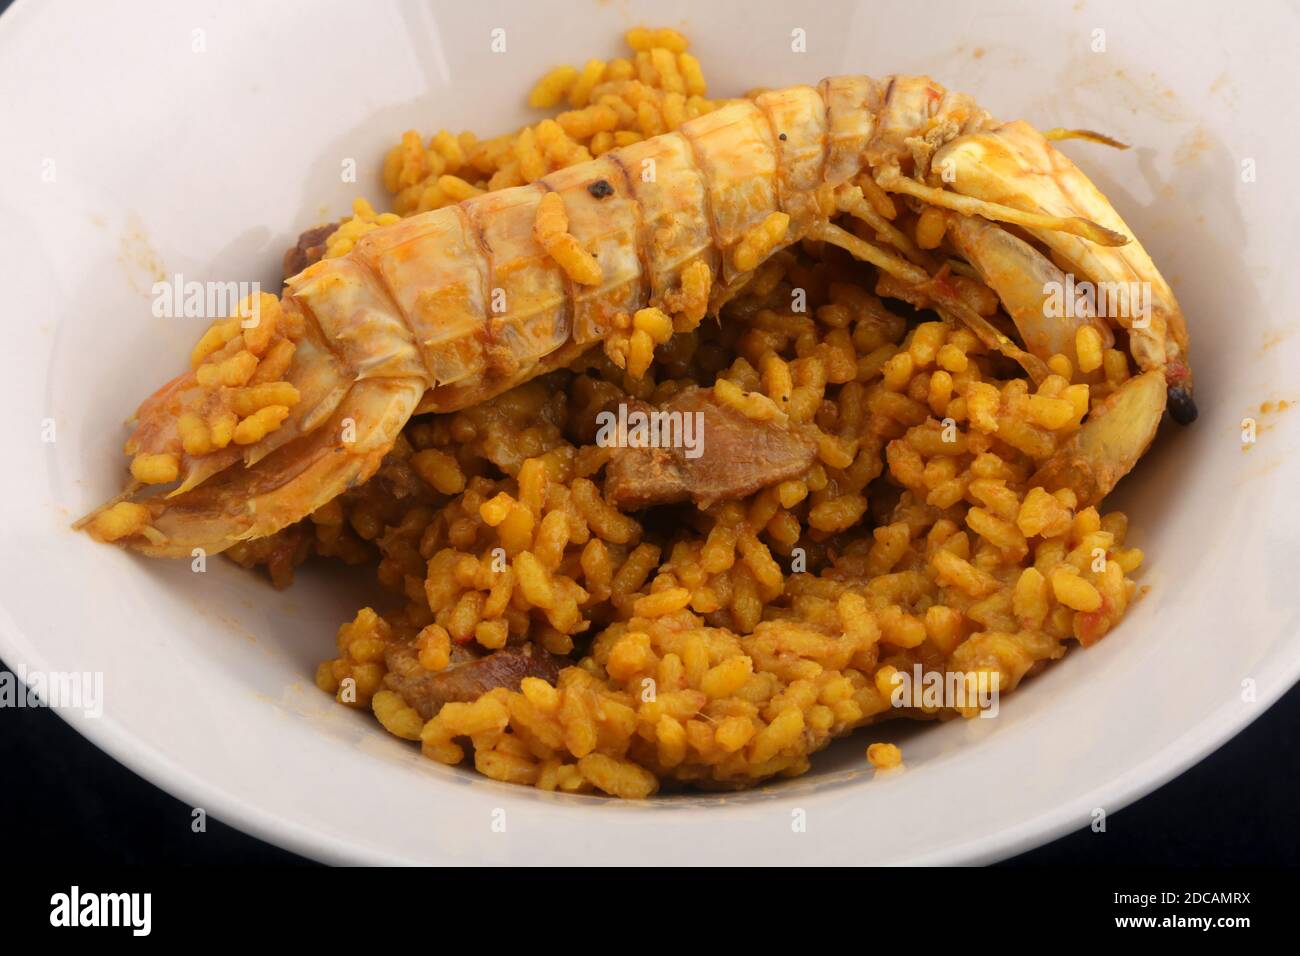 seafood rice with crayfish calamari and mussels typical spain Stock Photo